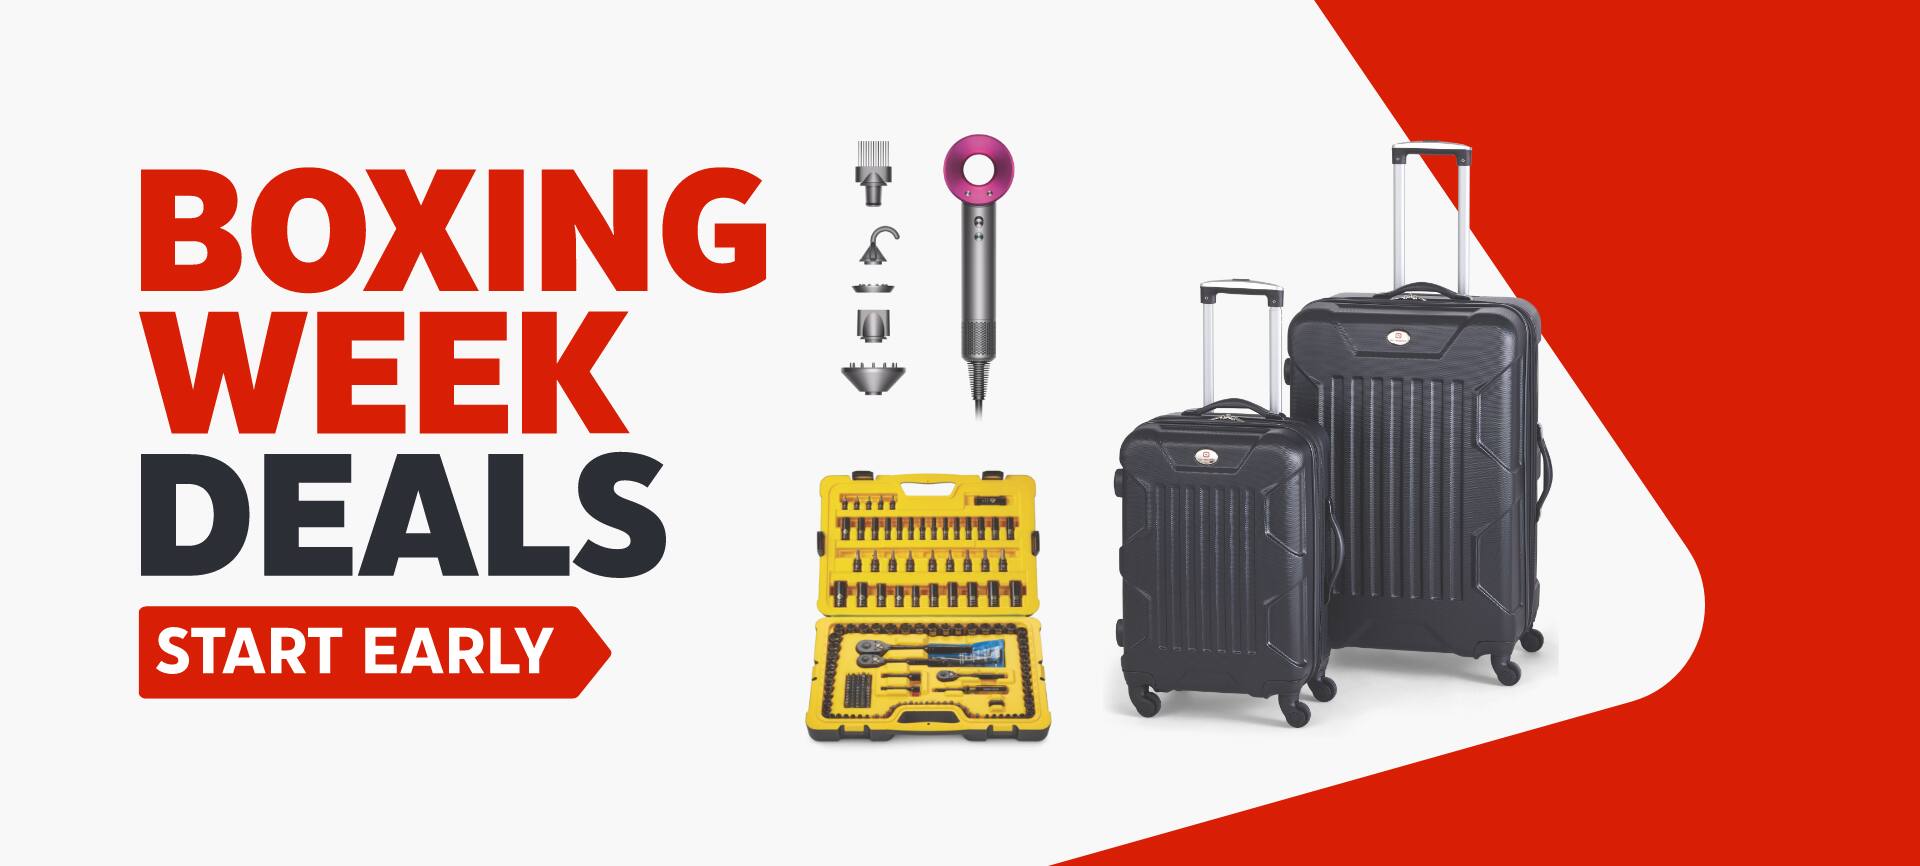 Stanley Tote Organisers and Carry Cases from Toolstop 